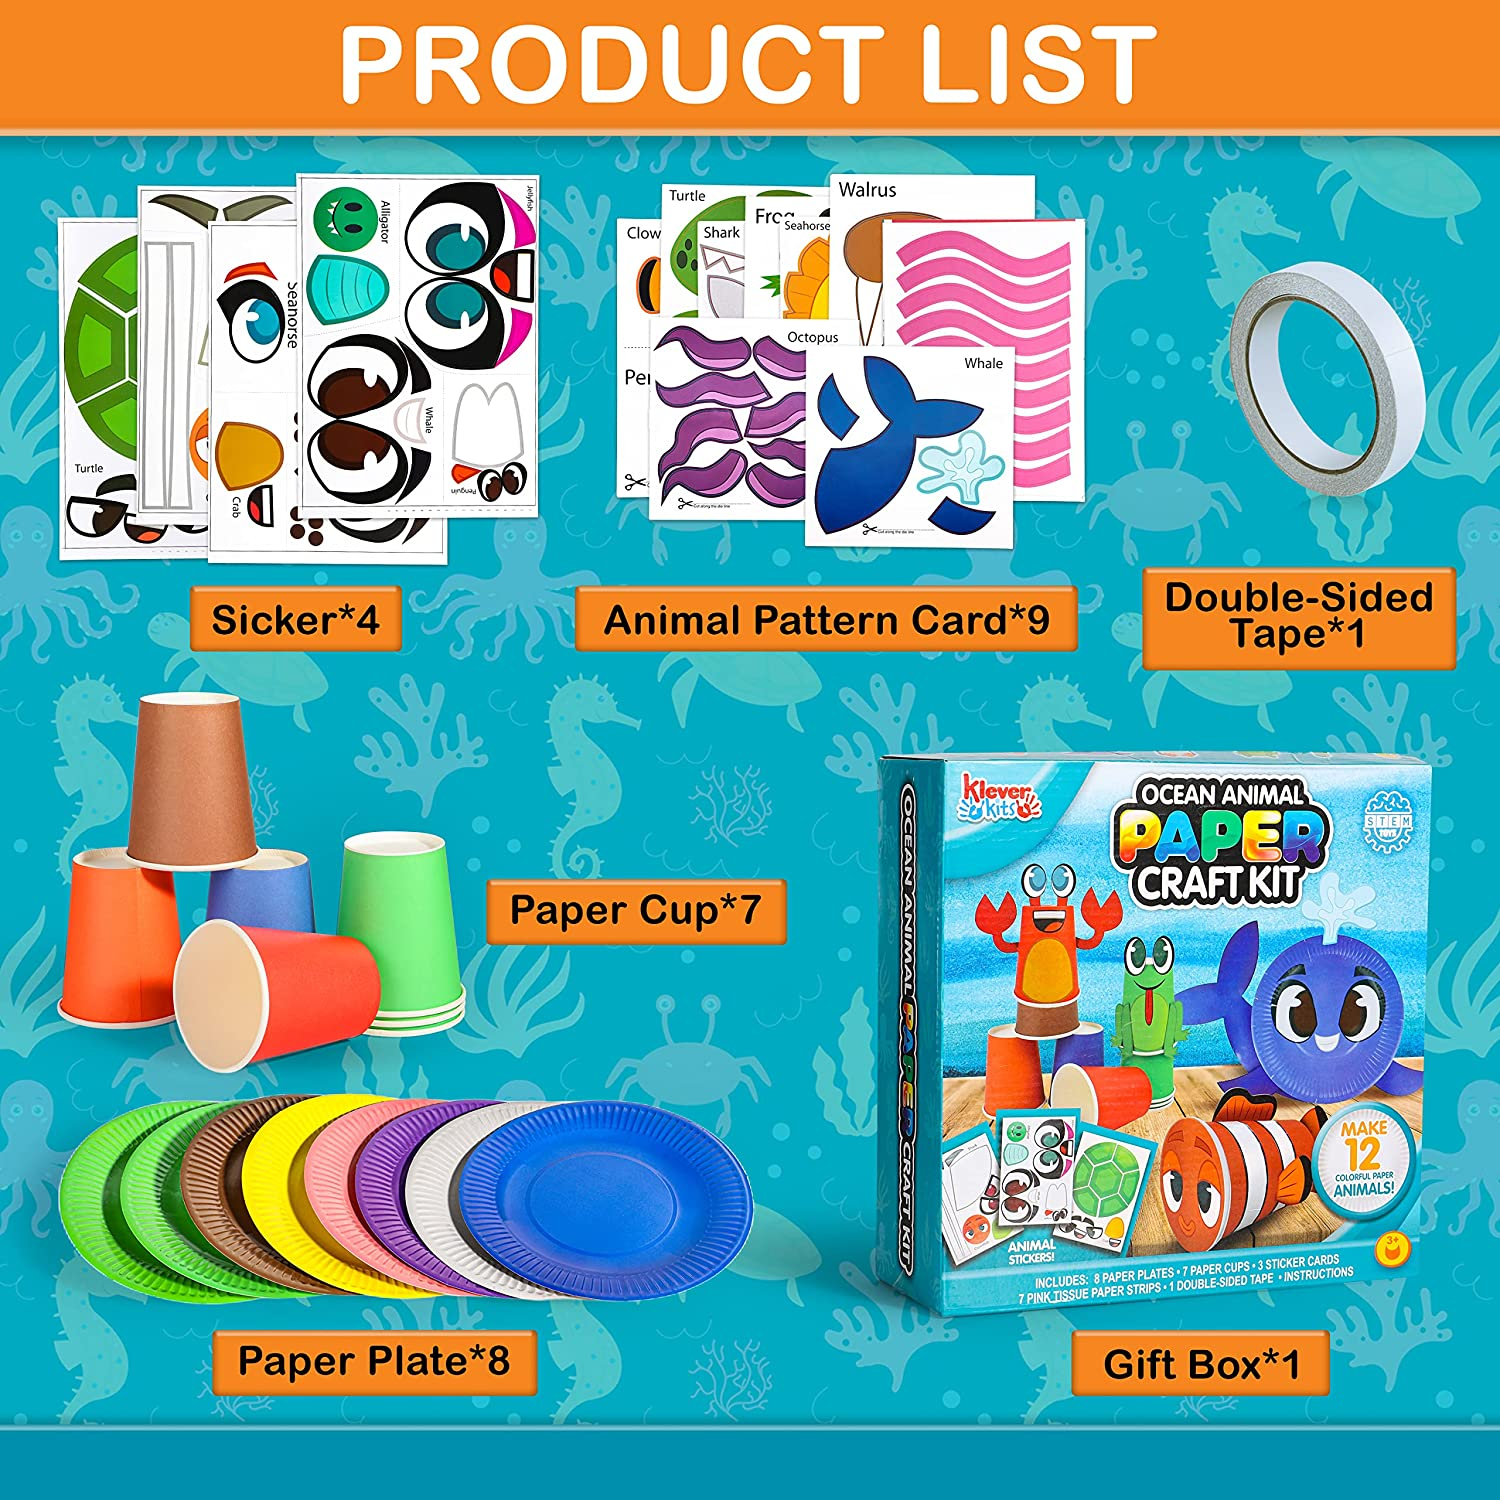 Arts and Crafts for Kids Ages 2-4 3-5, 28PCS Fun Paper Plate Crafts, Ocean Animal Craft Kits for Toddlers, Art Project Kits for Preschoolers, DIY Children Activities for Boys and Grils